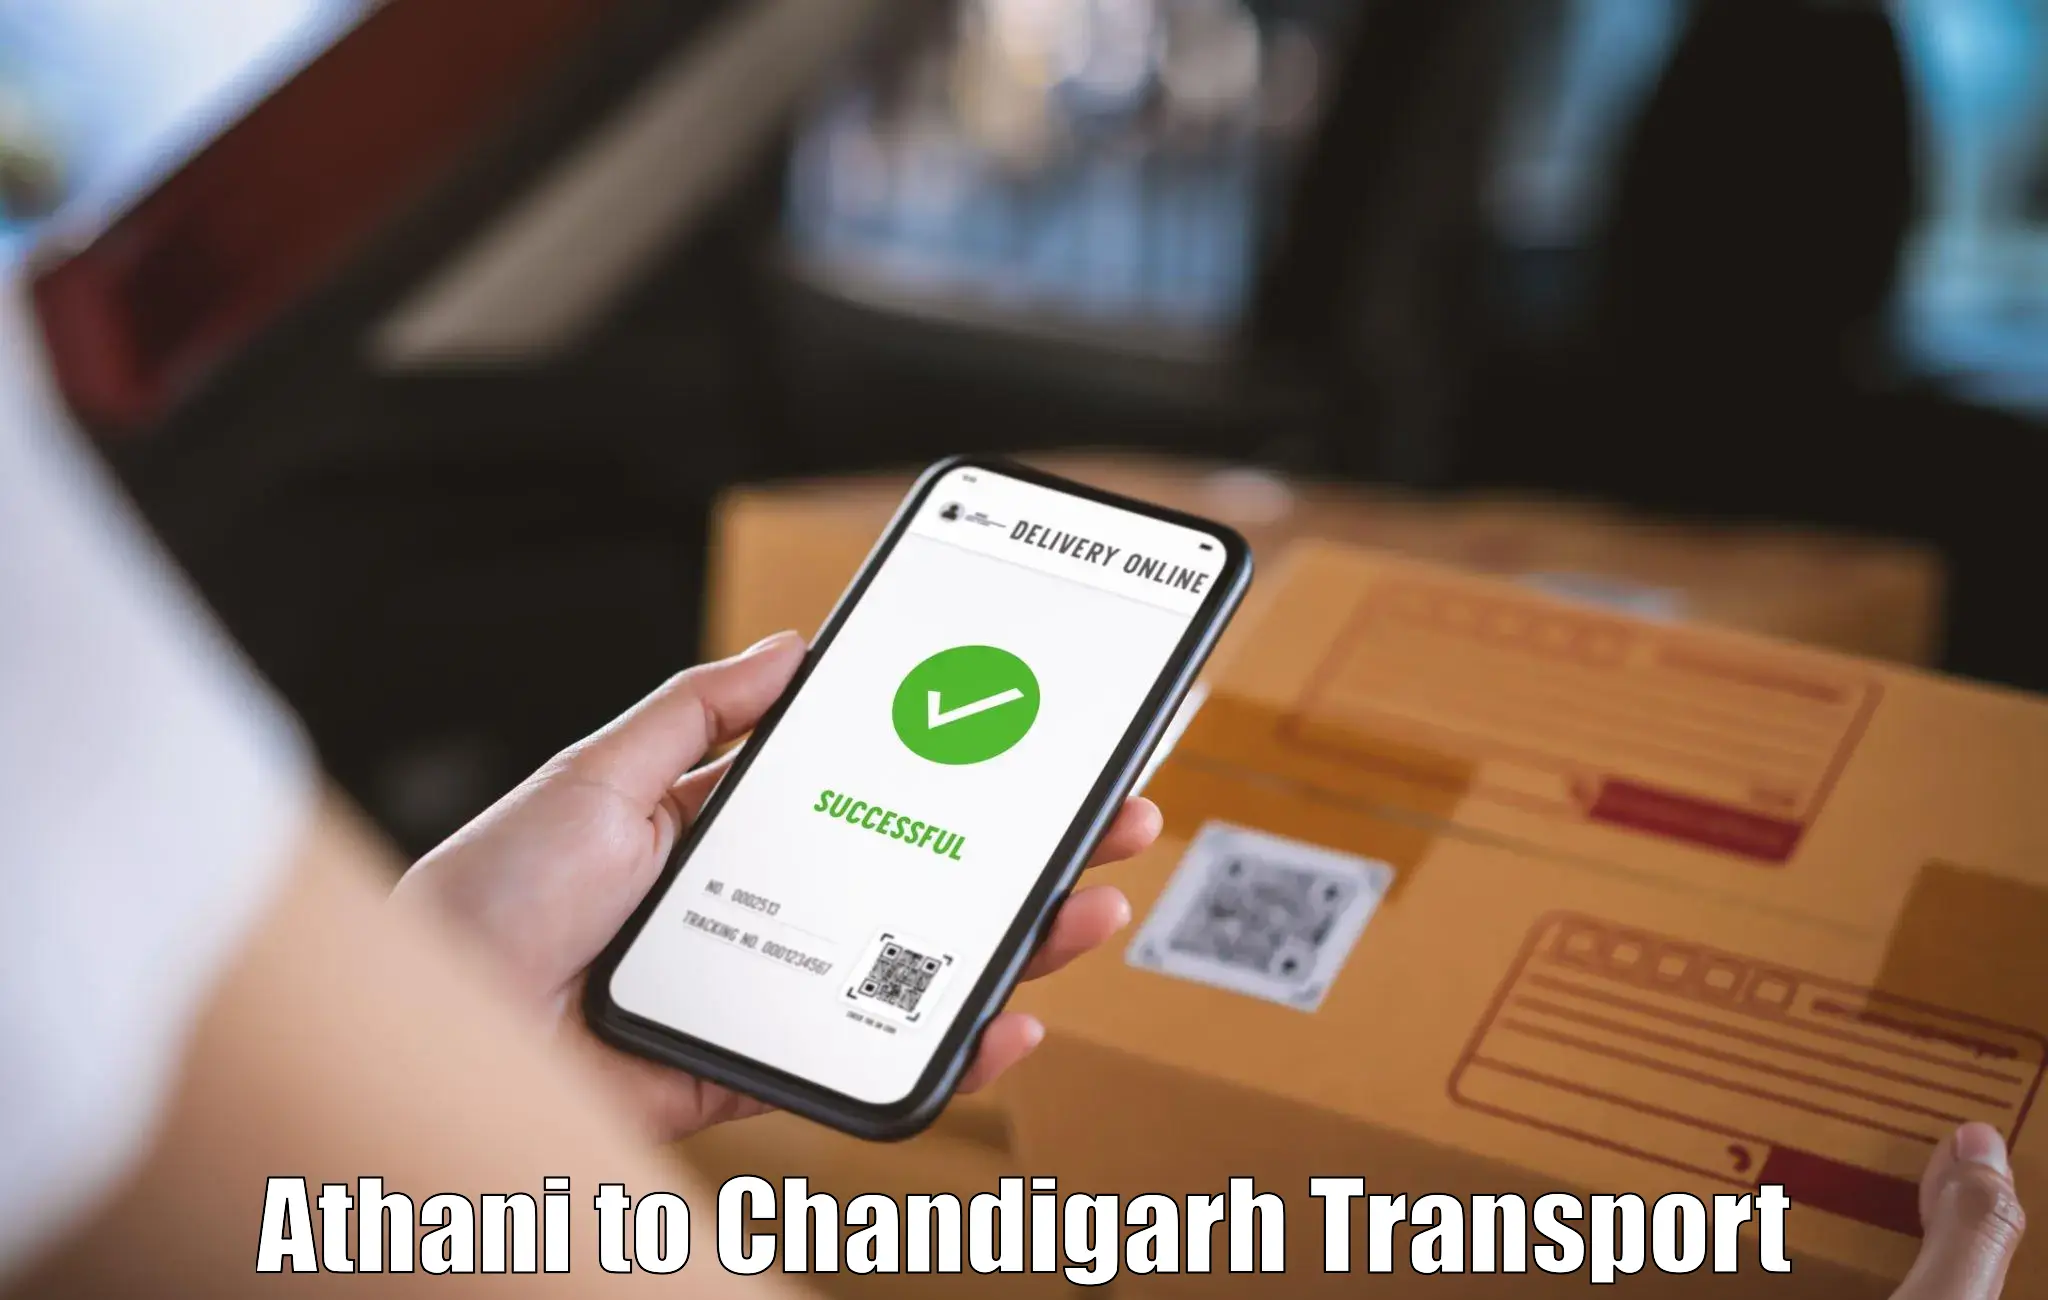 Transport shared services Athani to Chandigarh